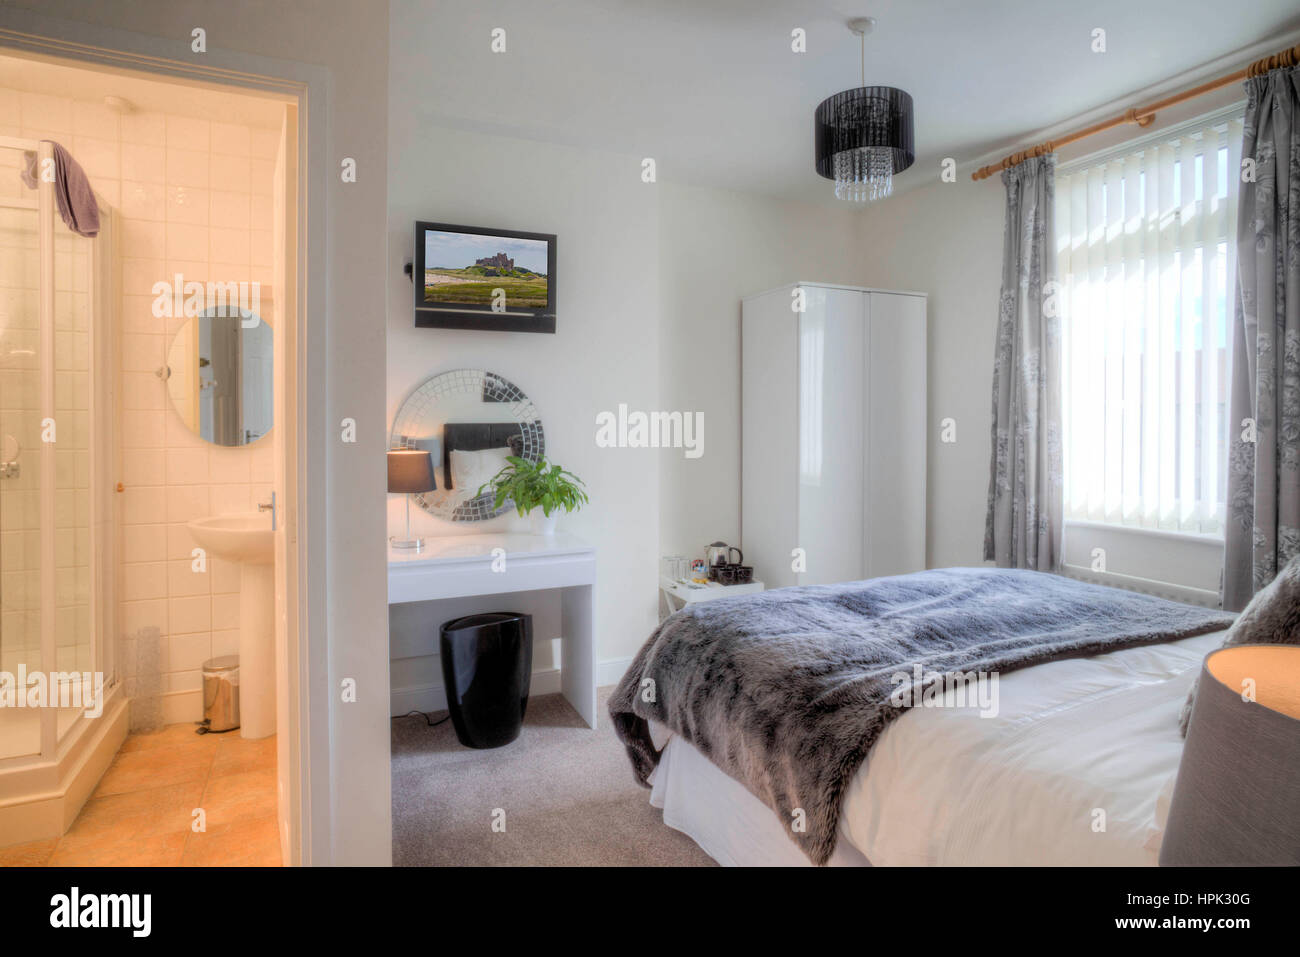 Empty hotel room with a double bed. A bathroom can be seen in the other room through the door. Stock Photo